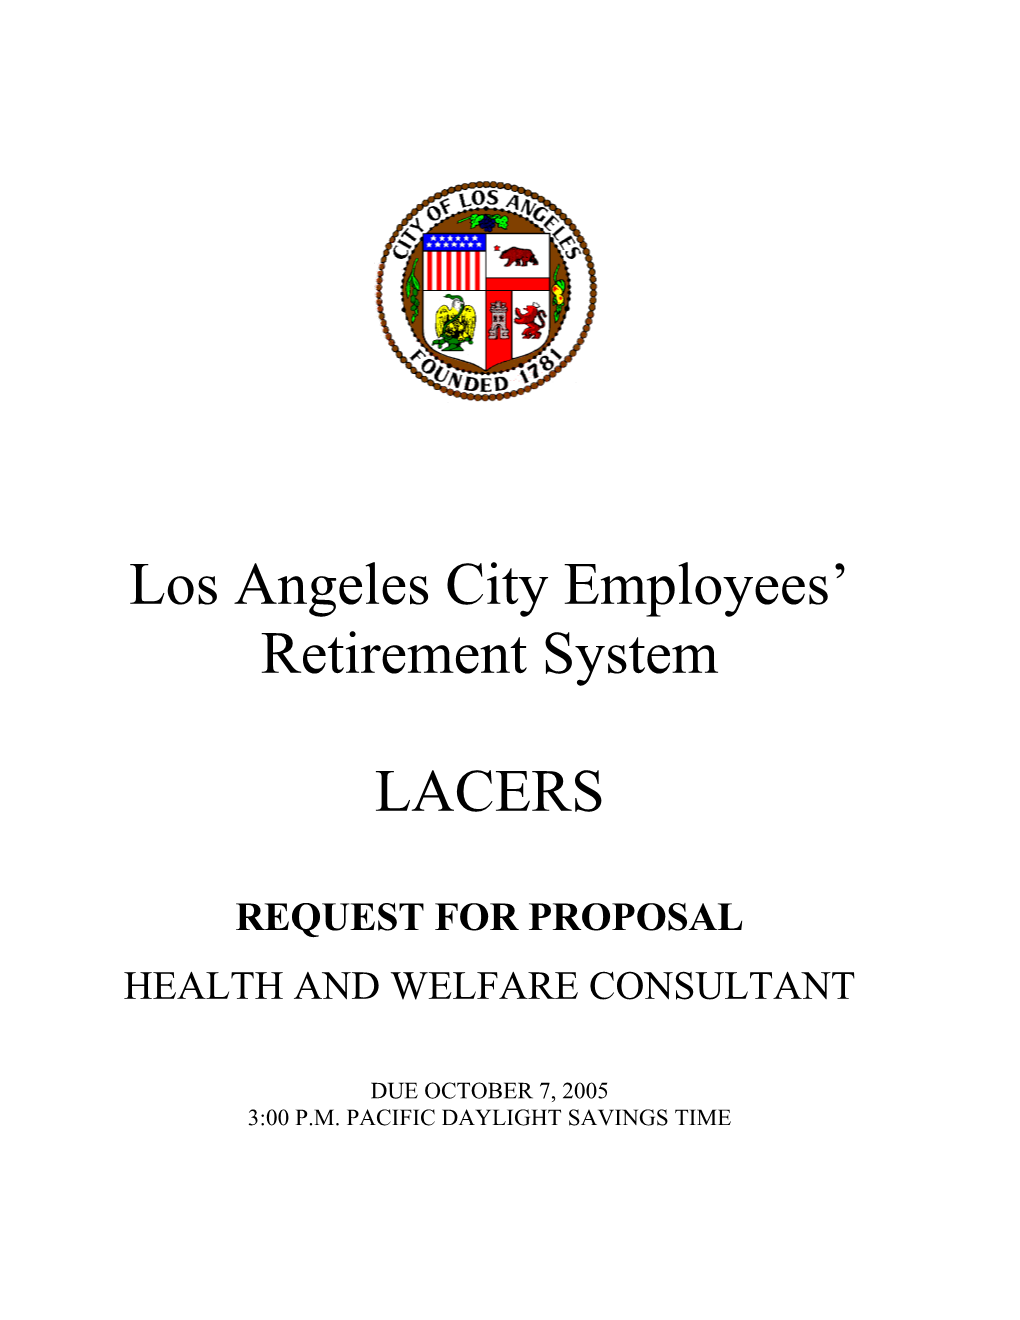 Los Angeles City Employees Retirement System s2